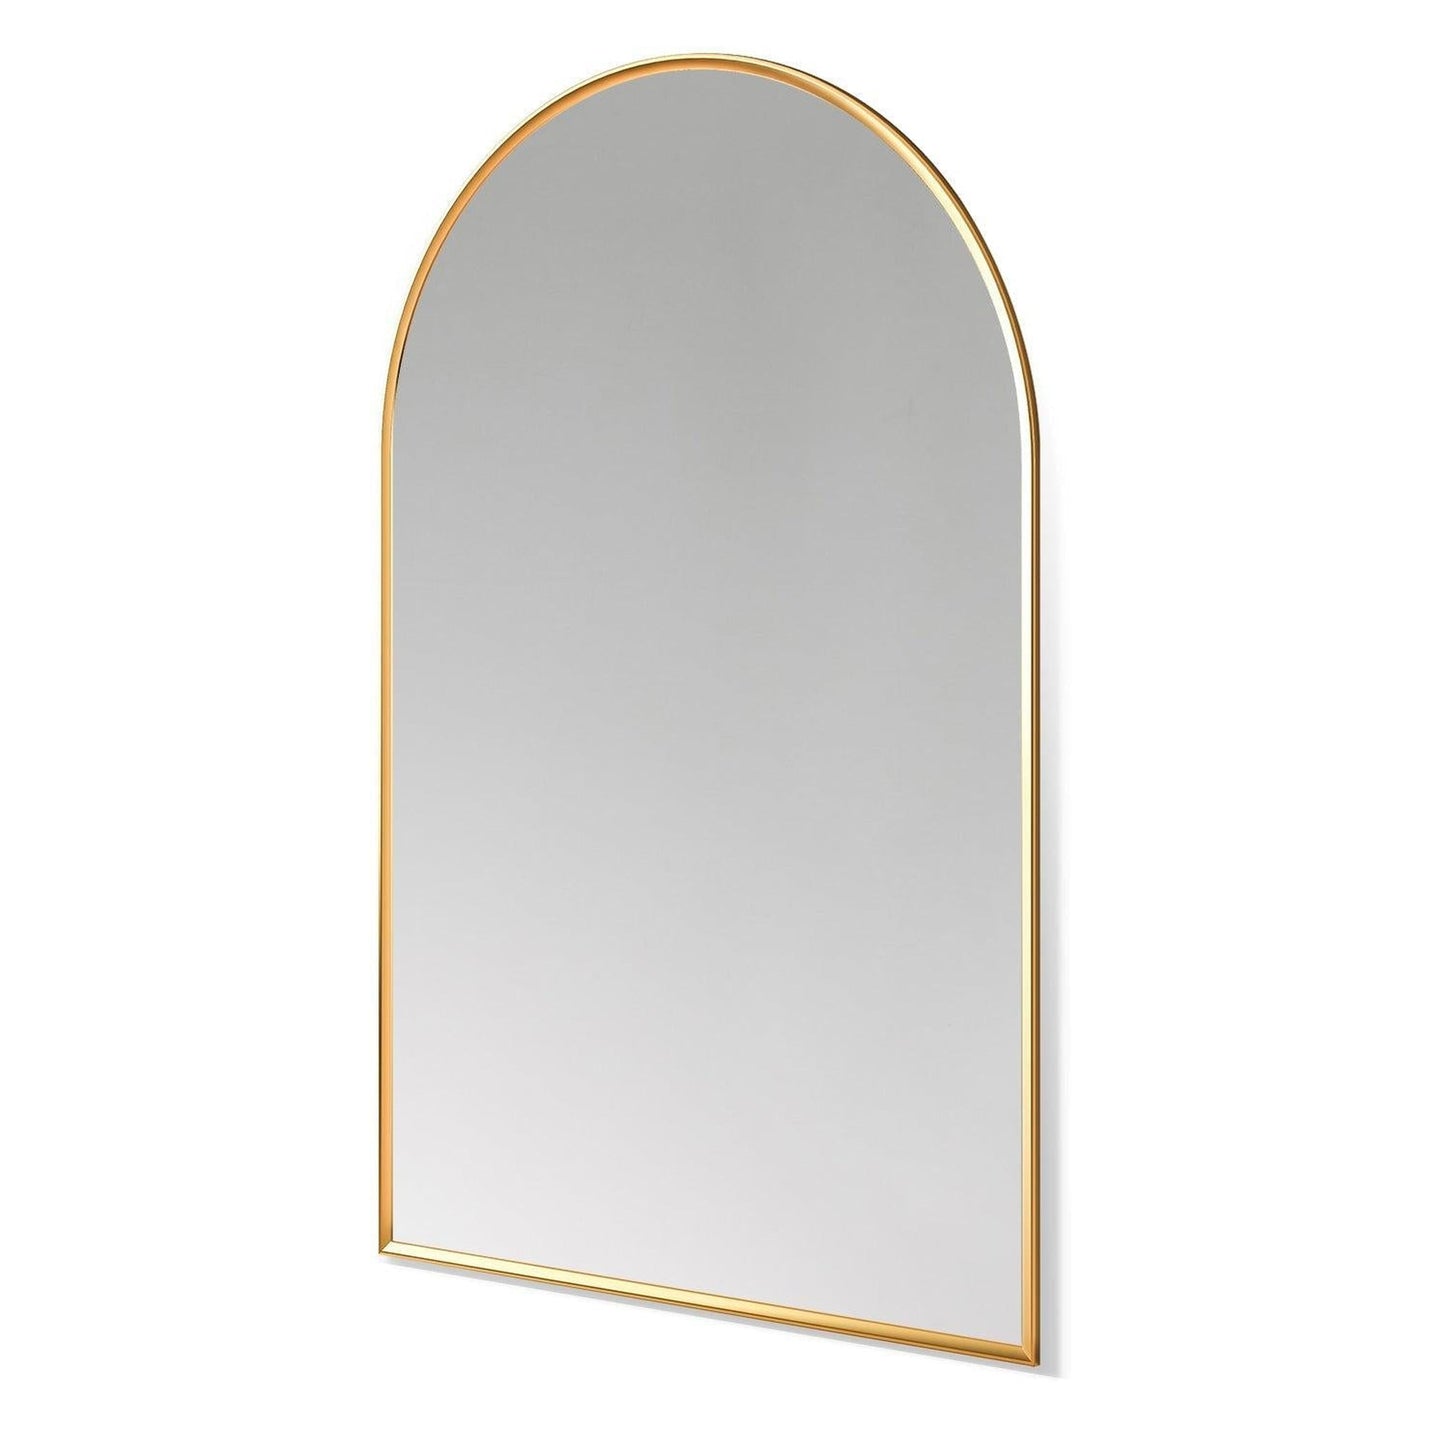 Altair Benoni 24" x 36" Arch Brushed Gold Aluminum Framed Wall-Mounted Mirror